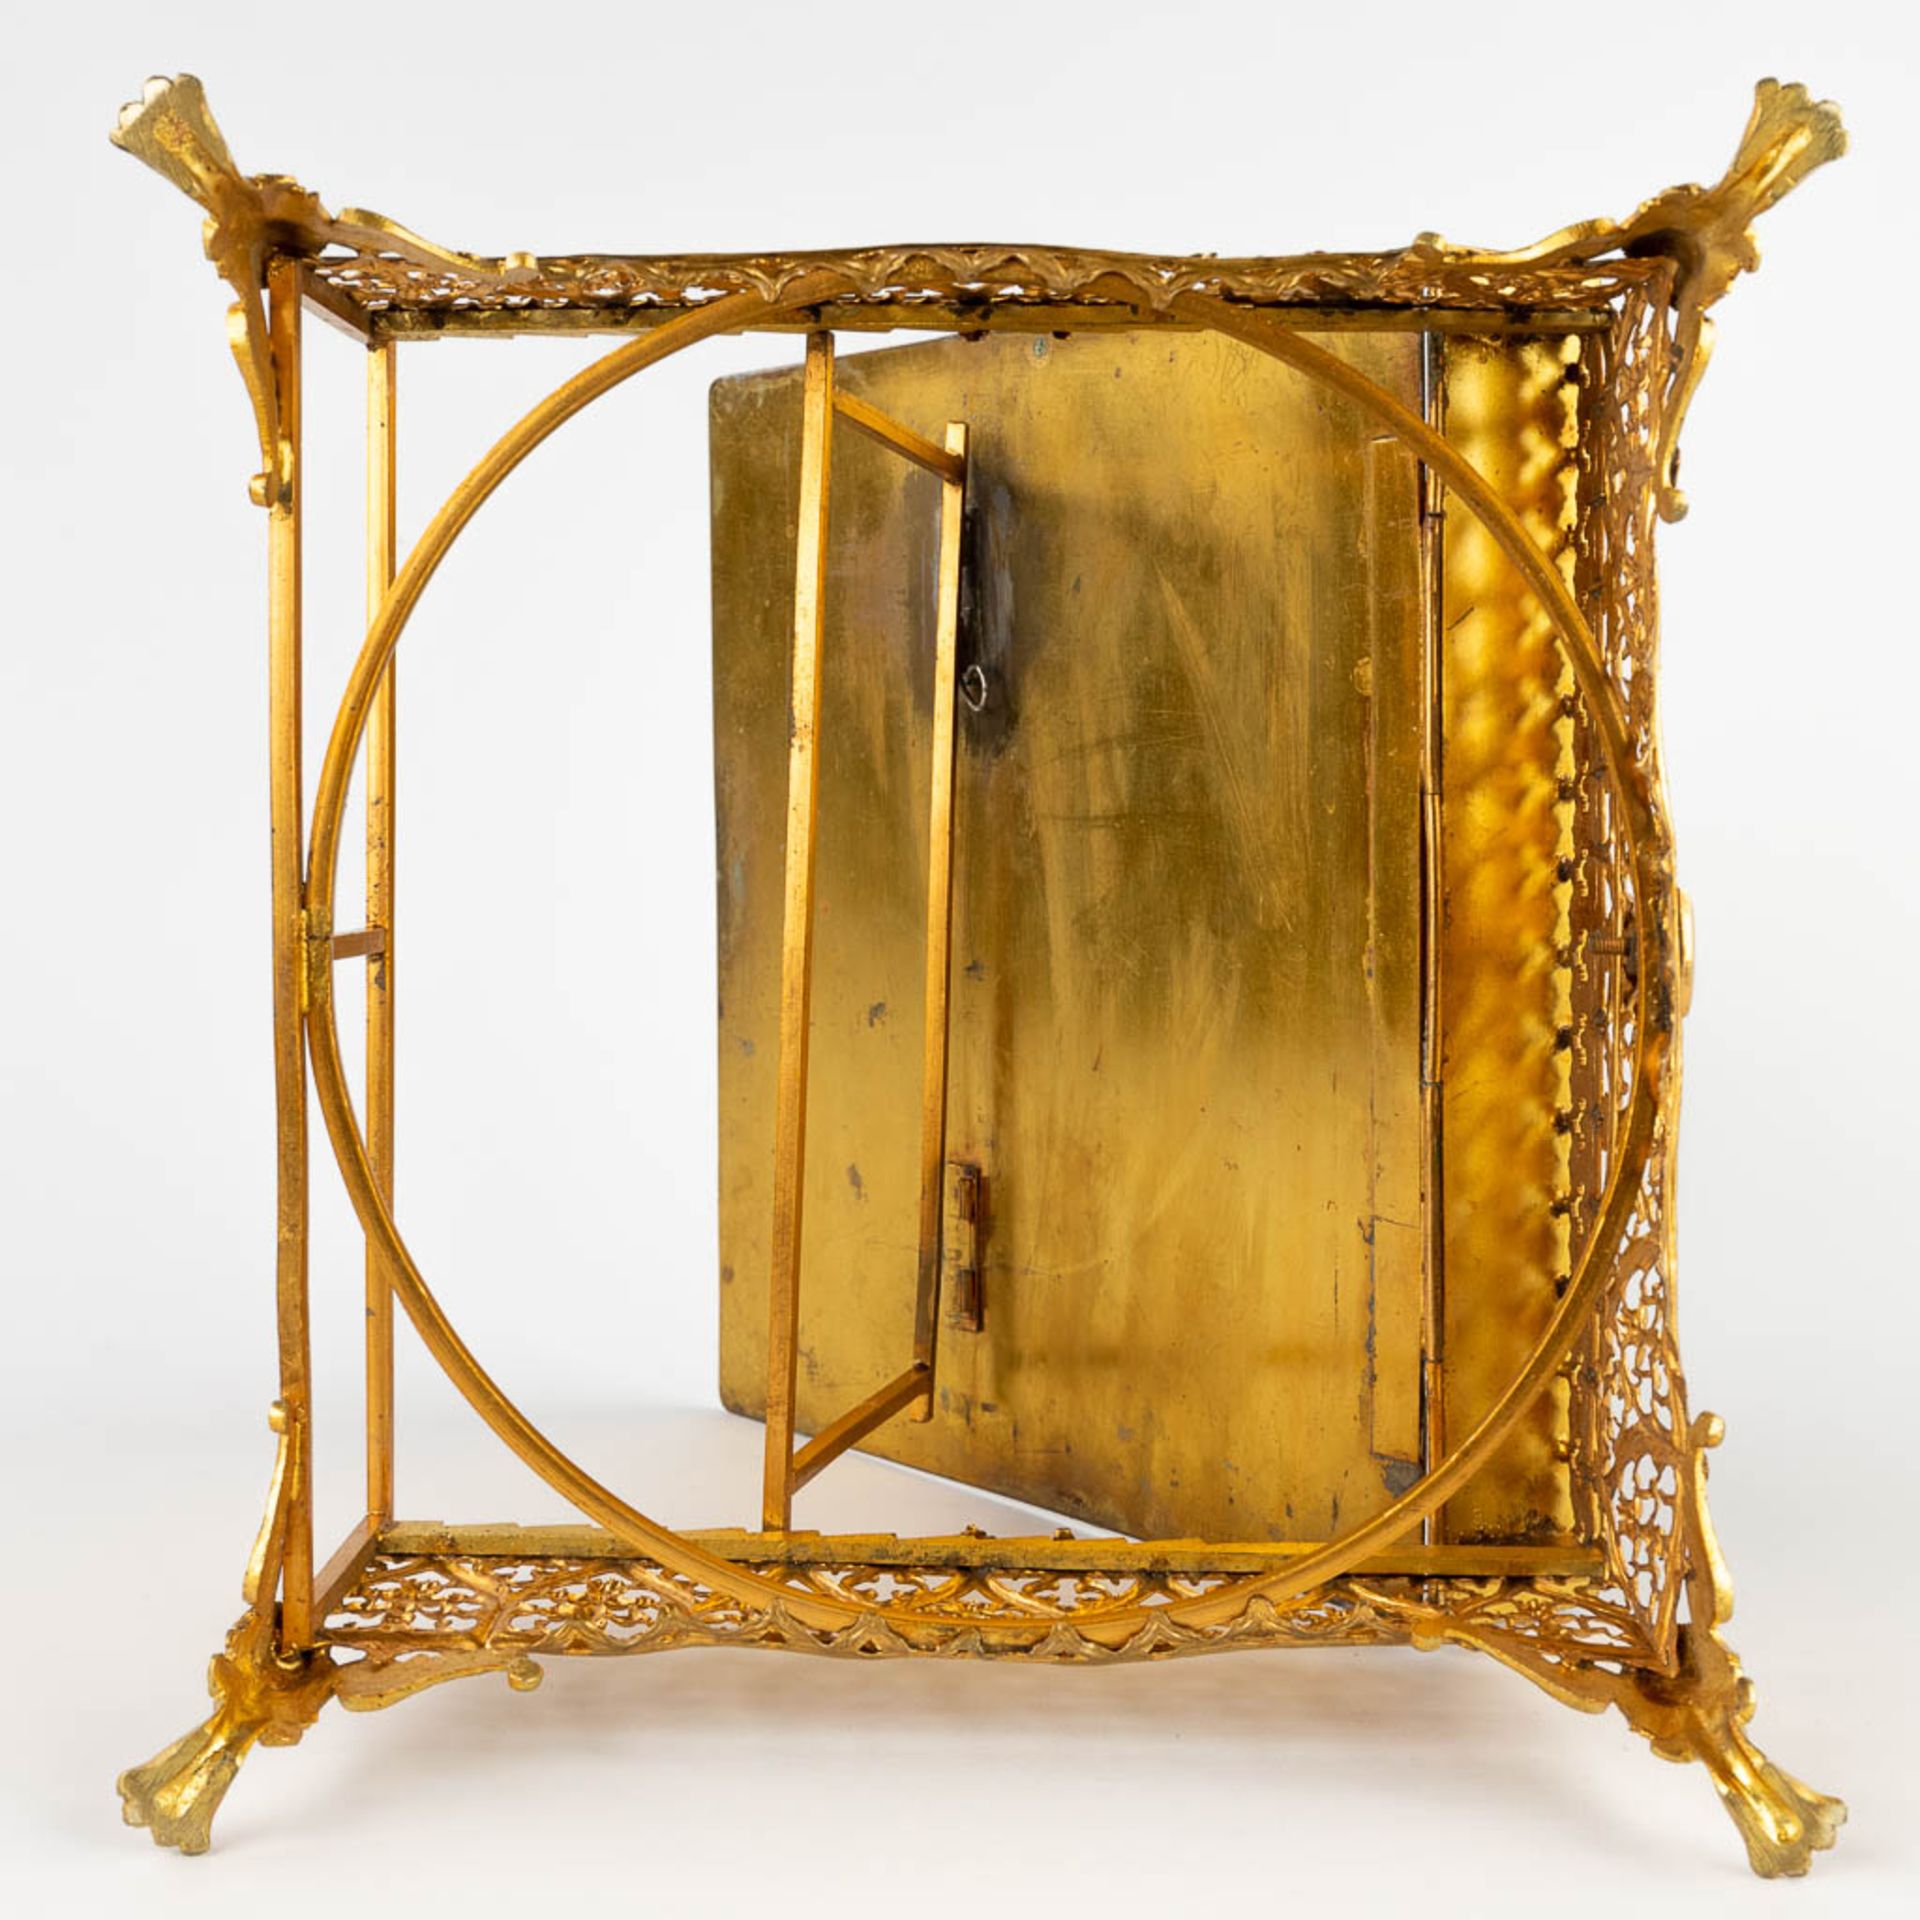 A small lectern, brass in a gothic revival style. 19th C. (D:25 x W:25 x H:27 cm) - Image 13 of 13